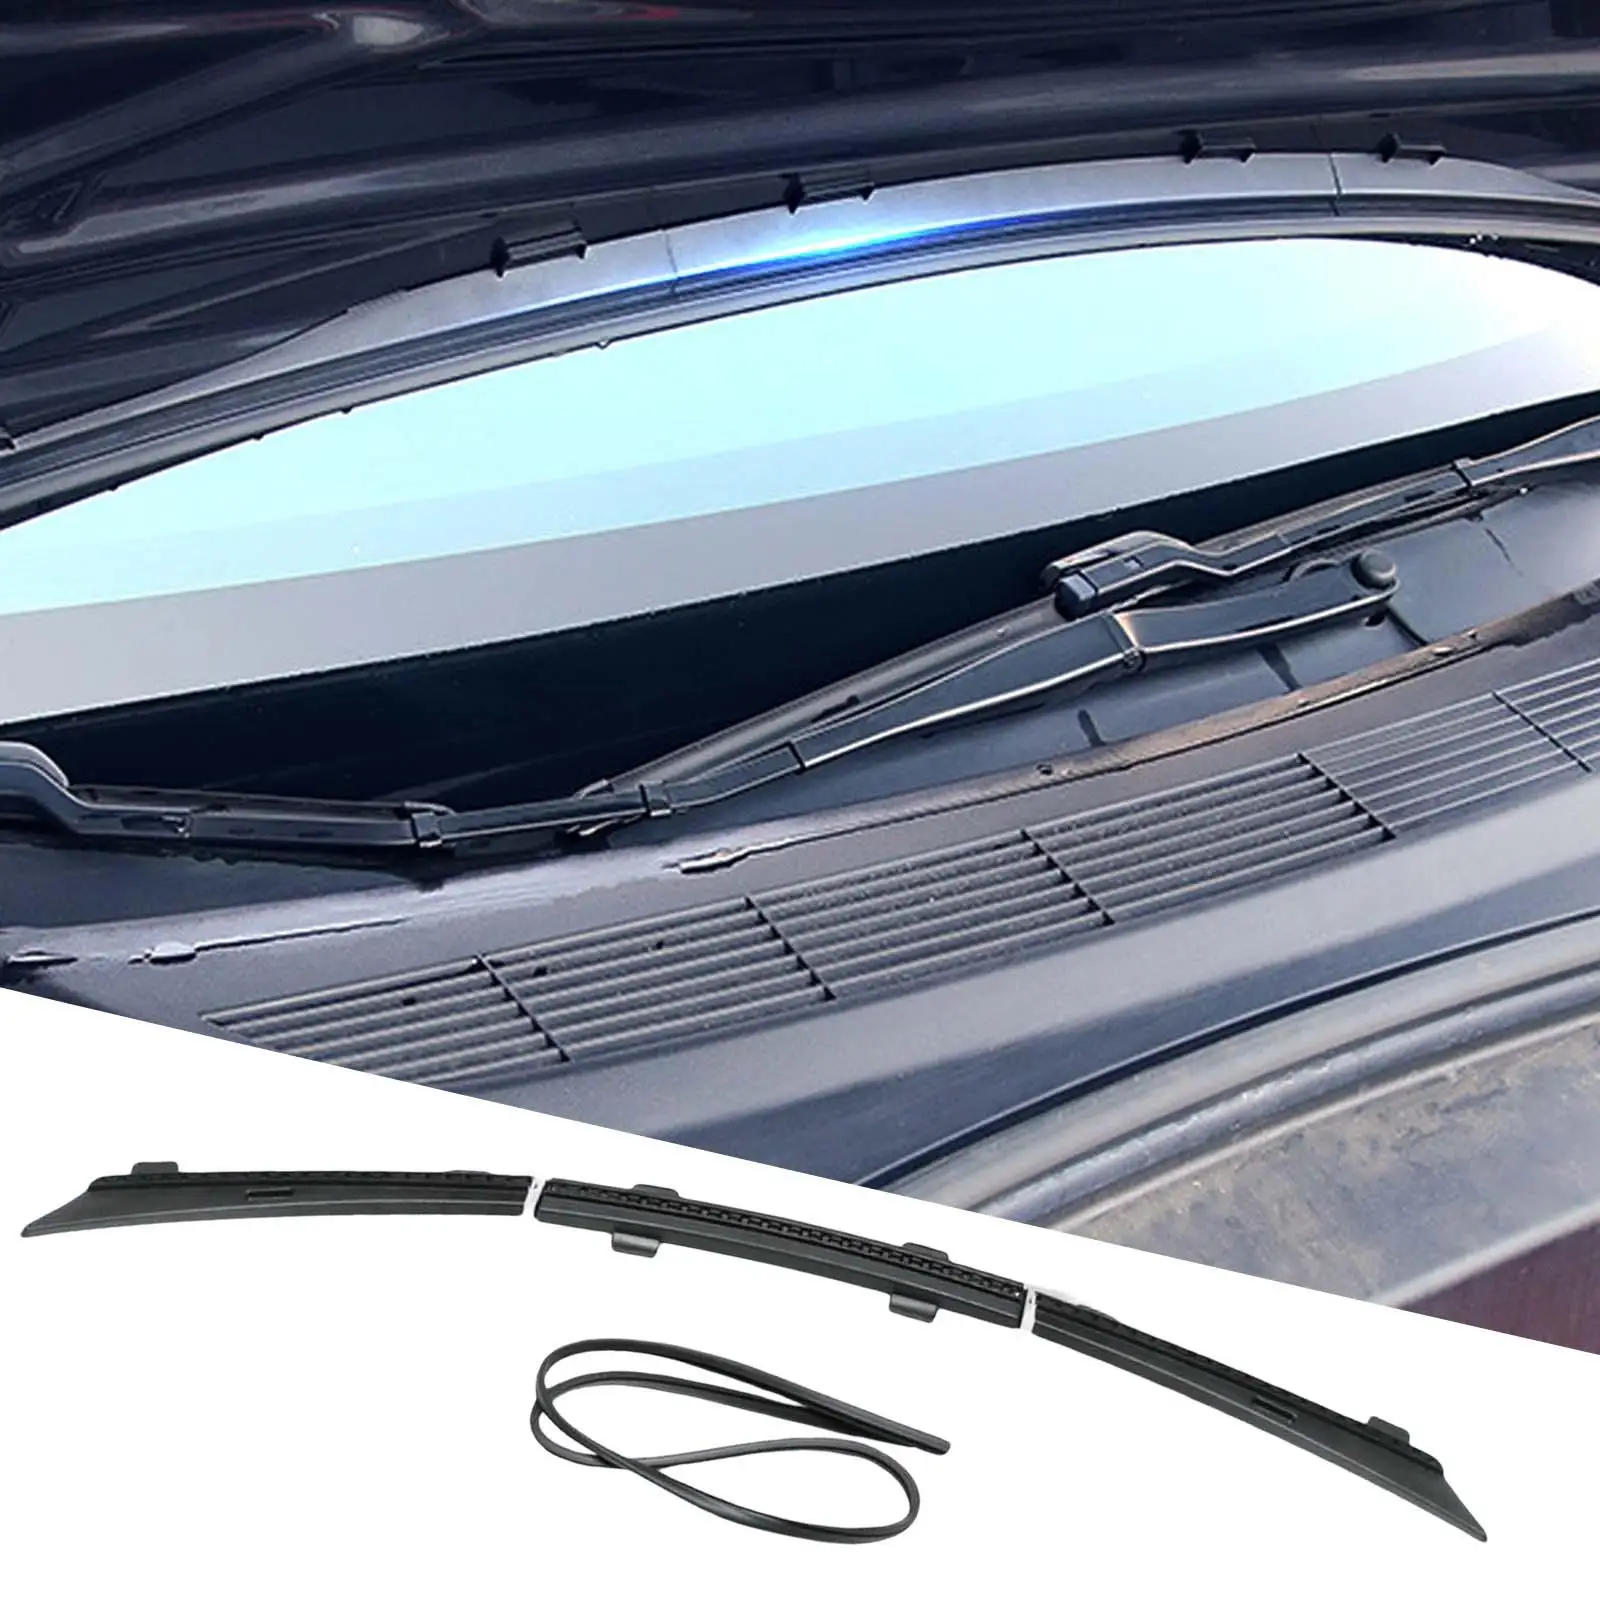 Car Front Hood Cover Water Strip Engine Cover Seal Trim Air Vent Intake Protect Modification Parts for Tesla Model 3